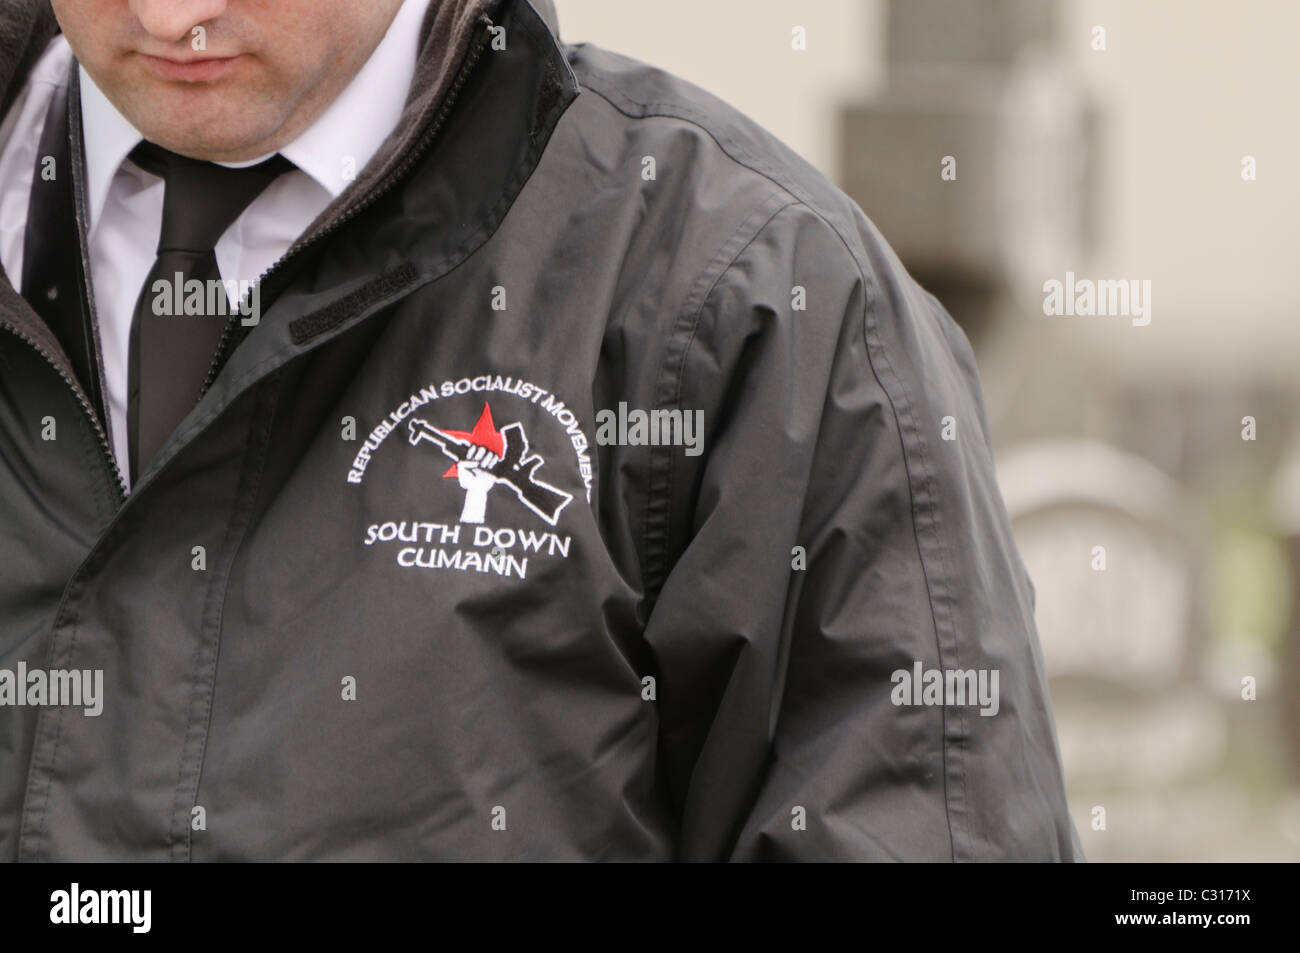 Insignia on a jacket 'Republican Socialist Movement, South Down Cumann' with a clenched Armalite Stock Photo